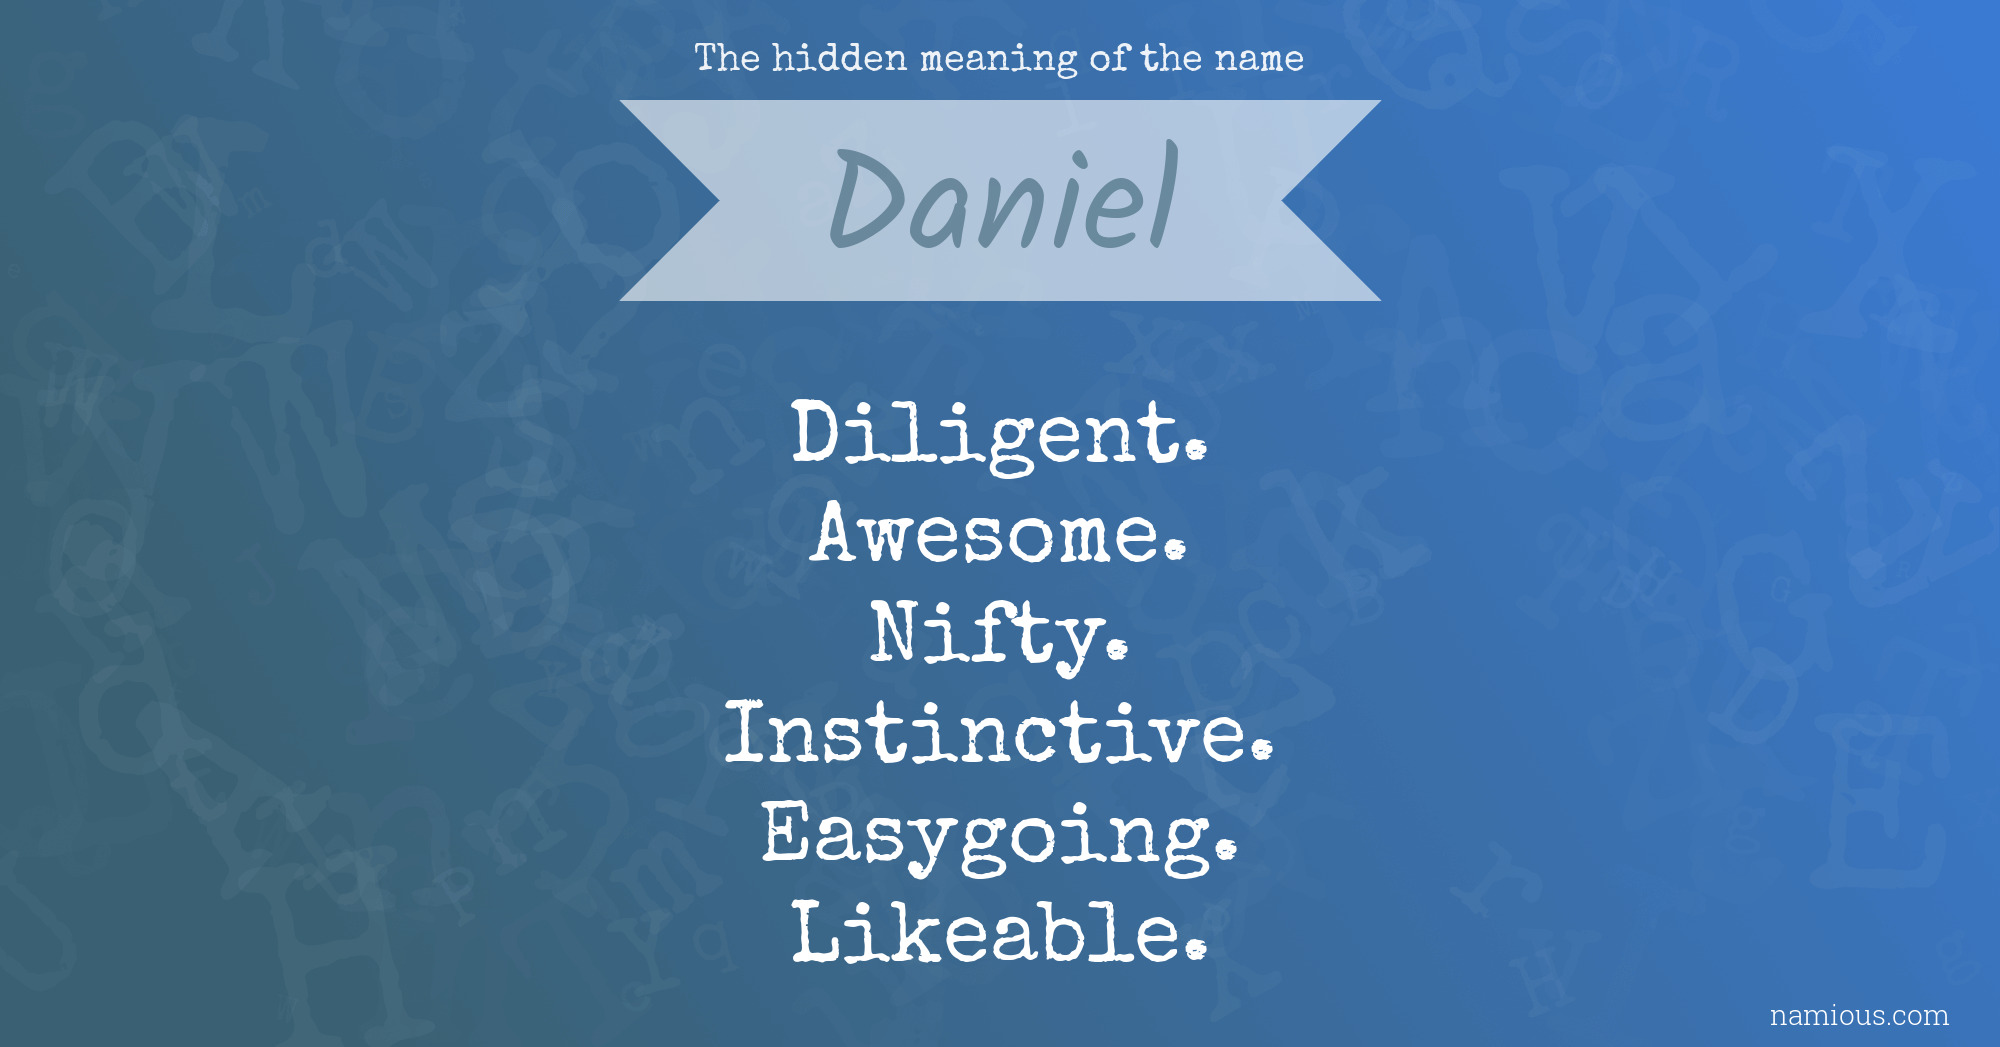 The hidden meaning of the name Daniel